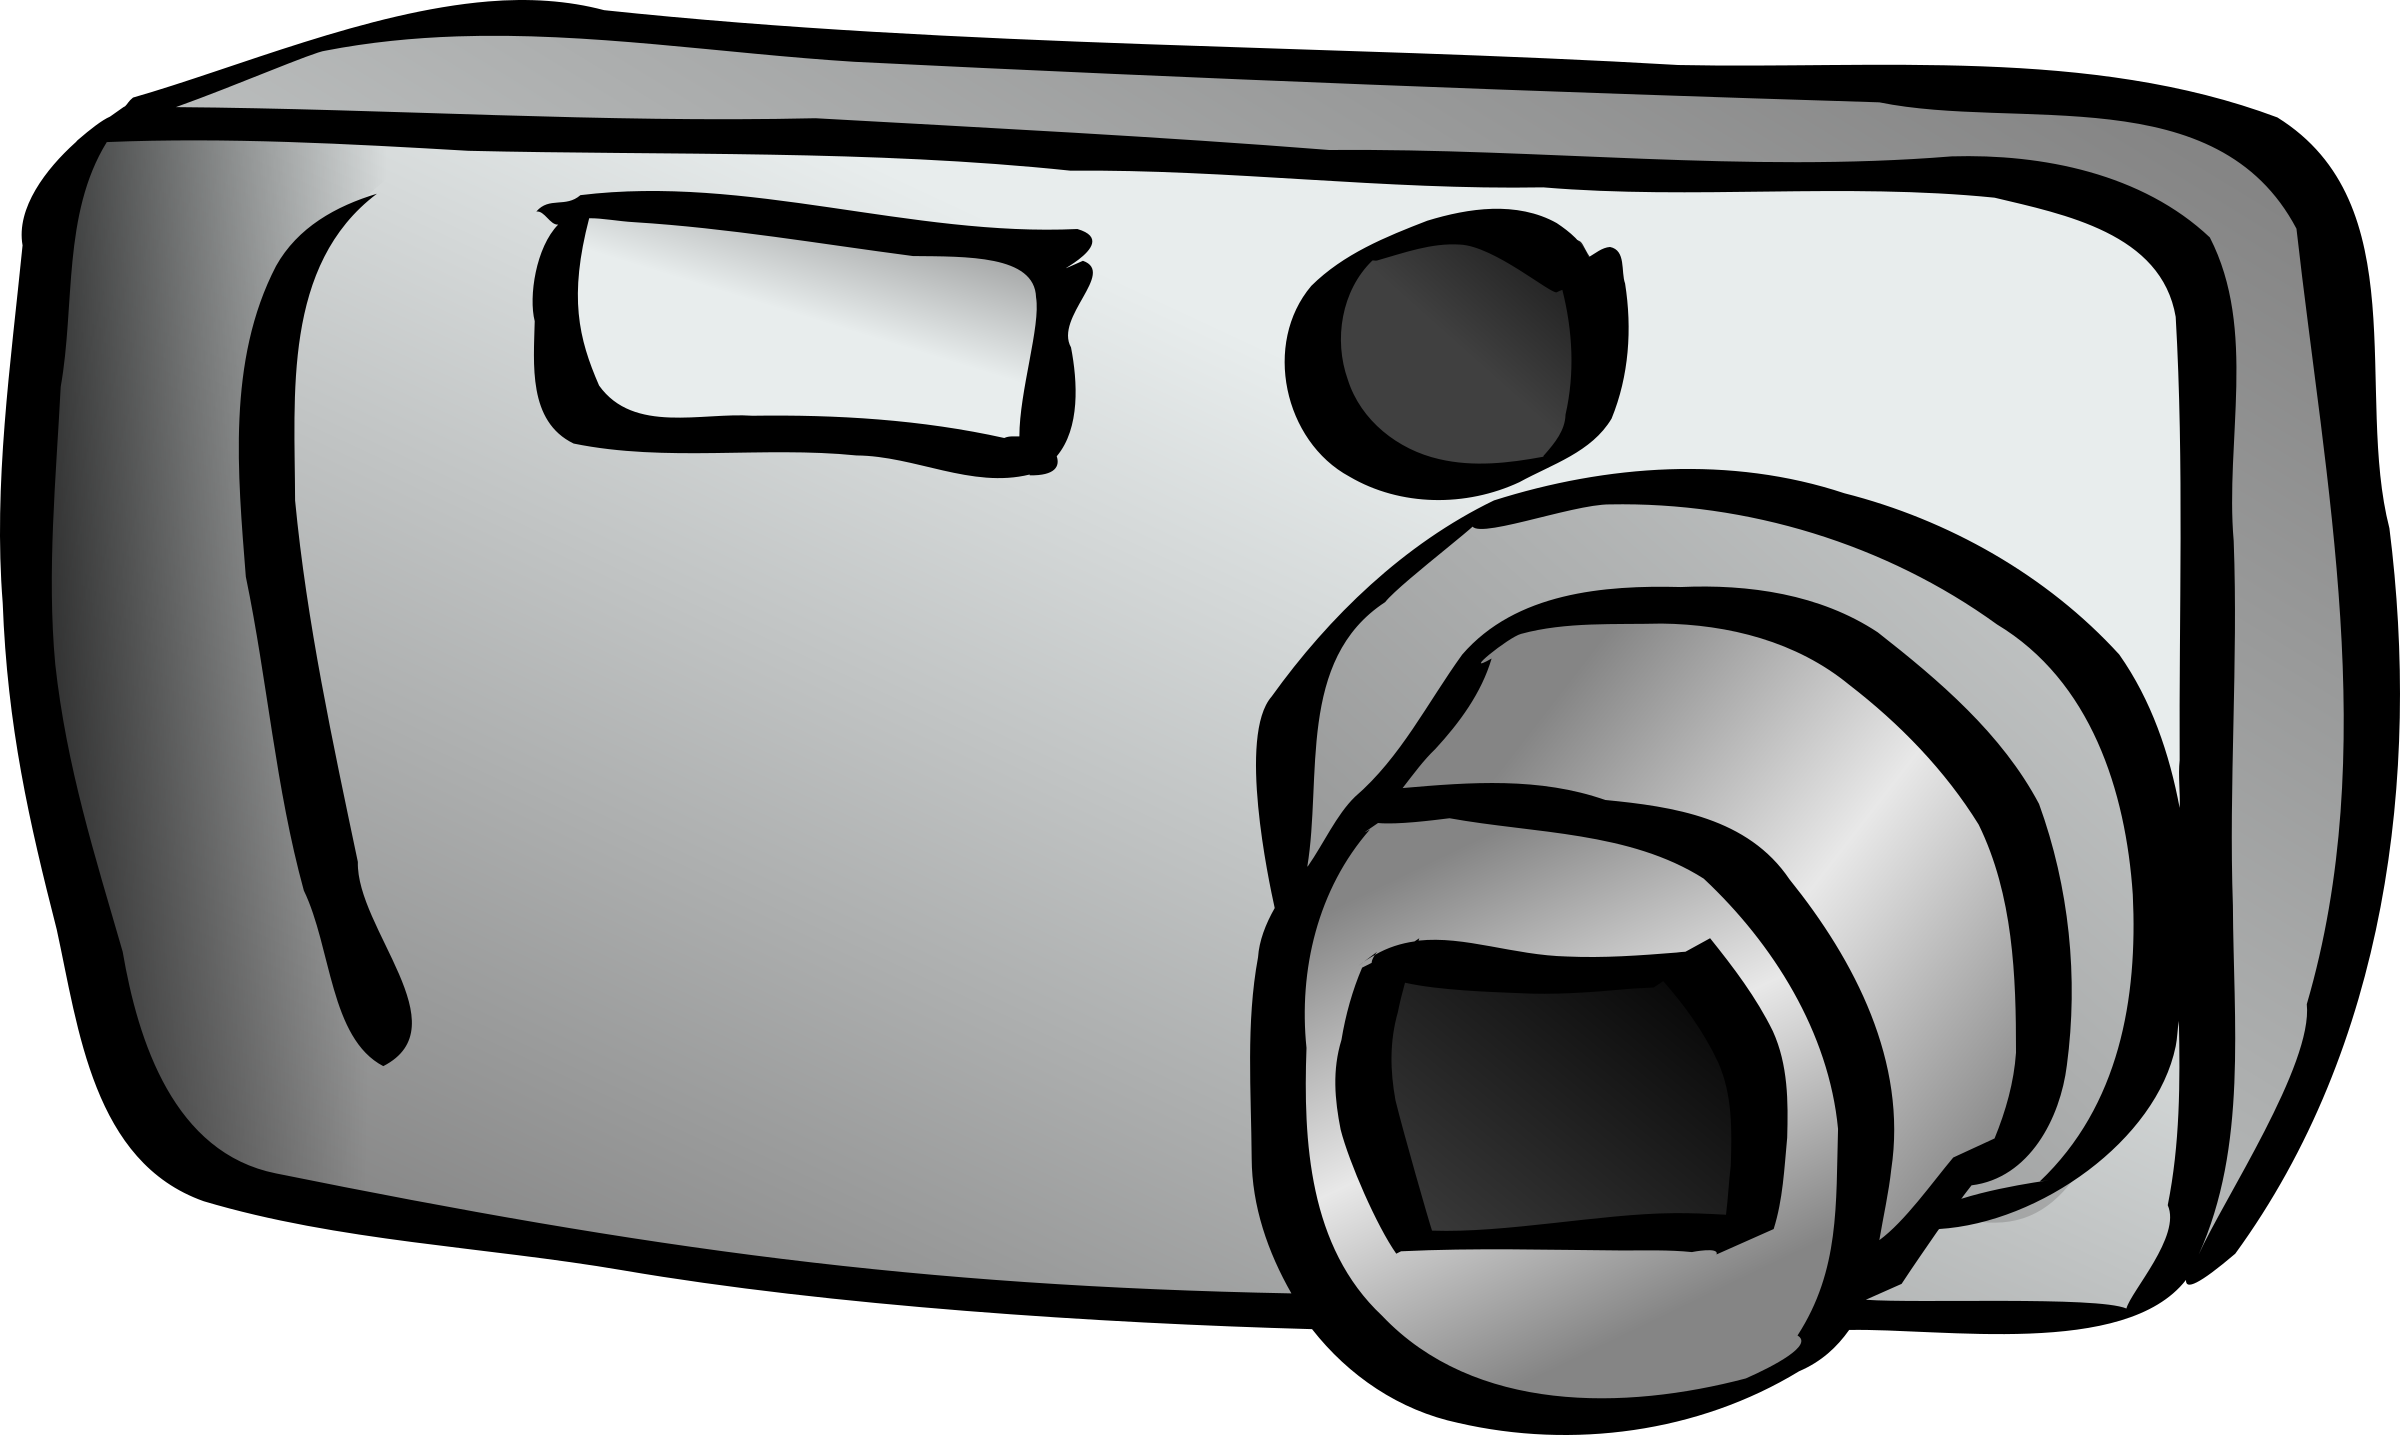 Onlinelabels Clip Art Camera Clipart Black And White